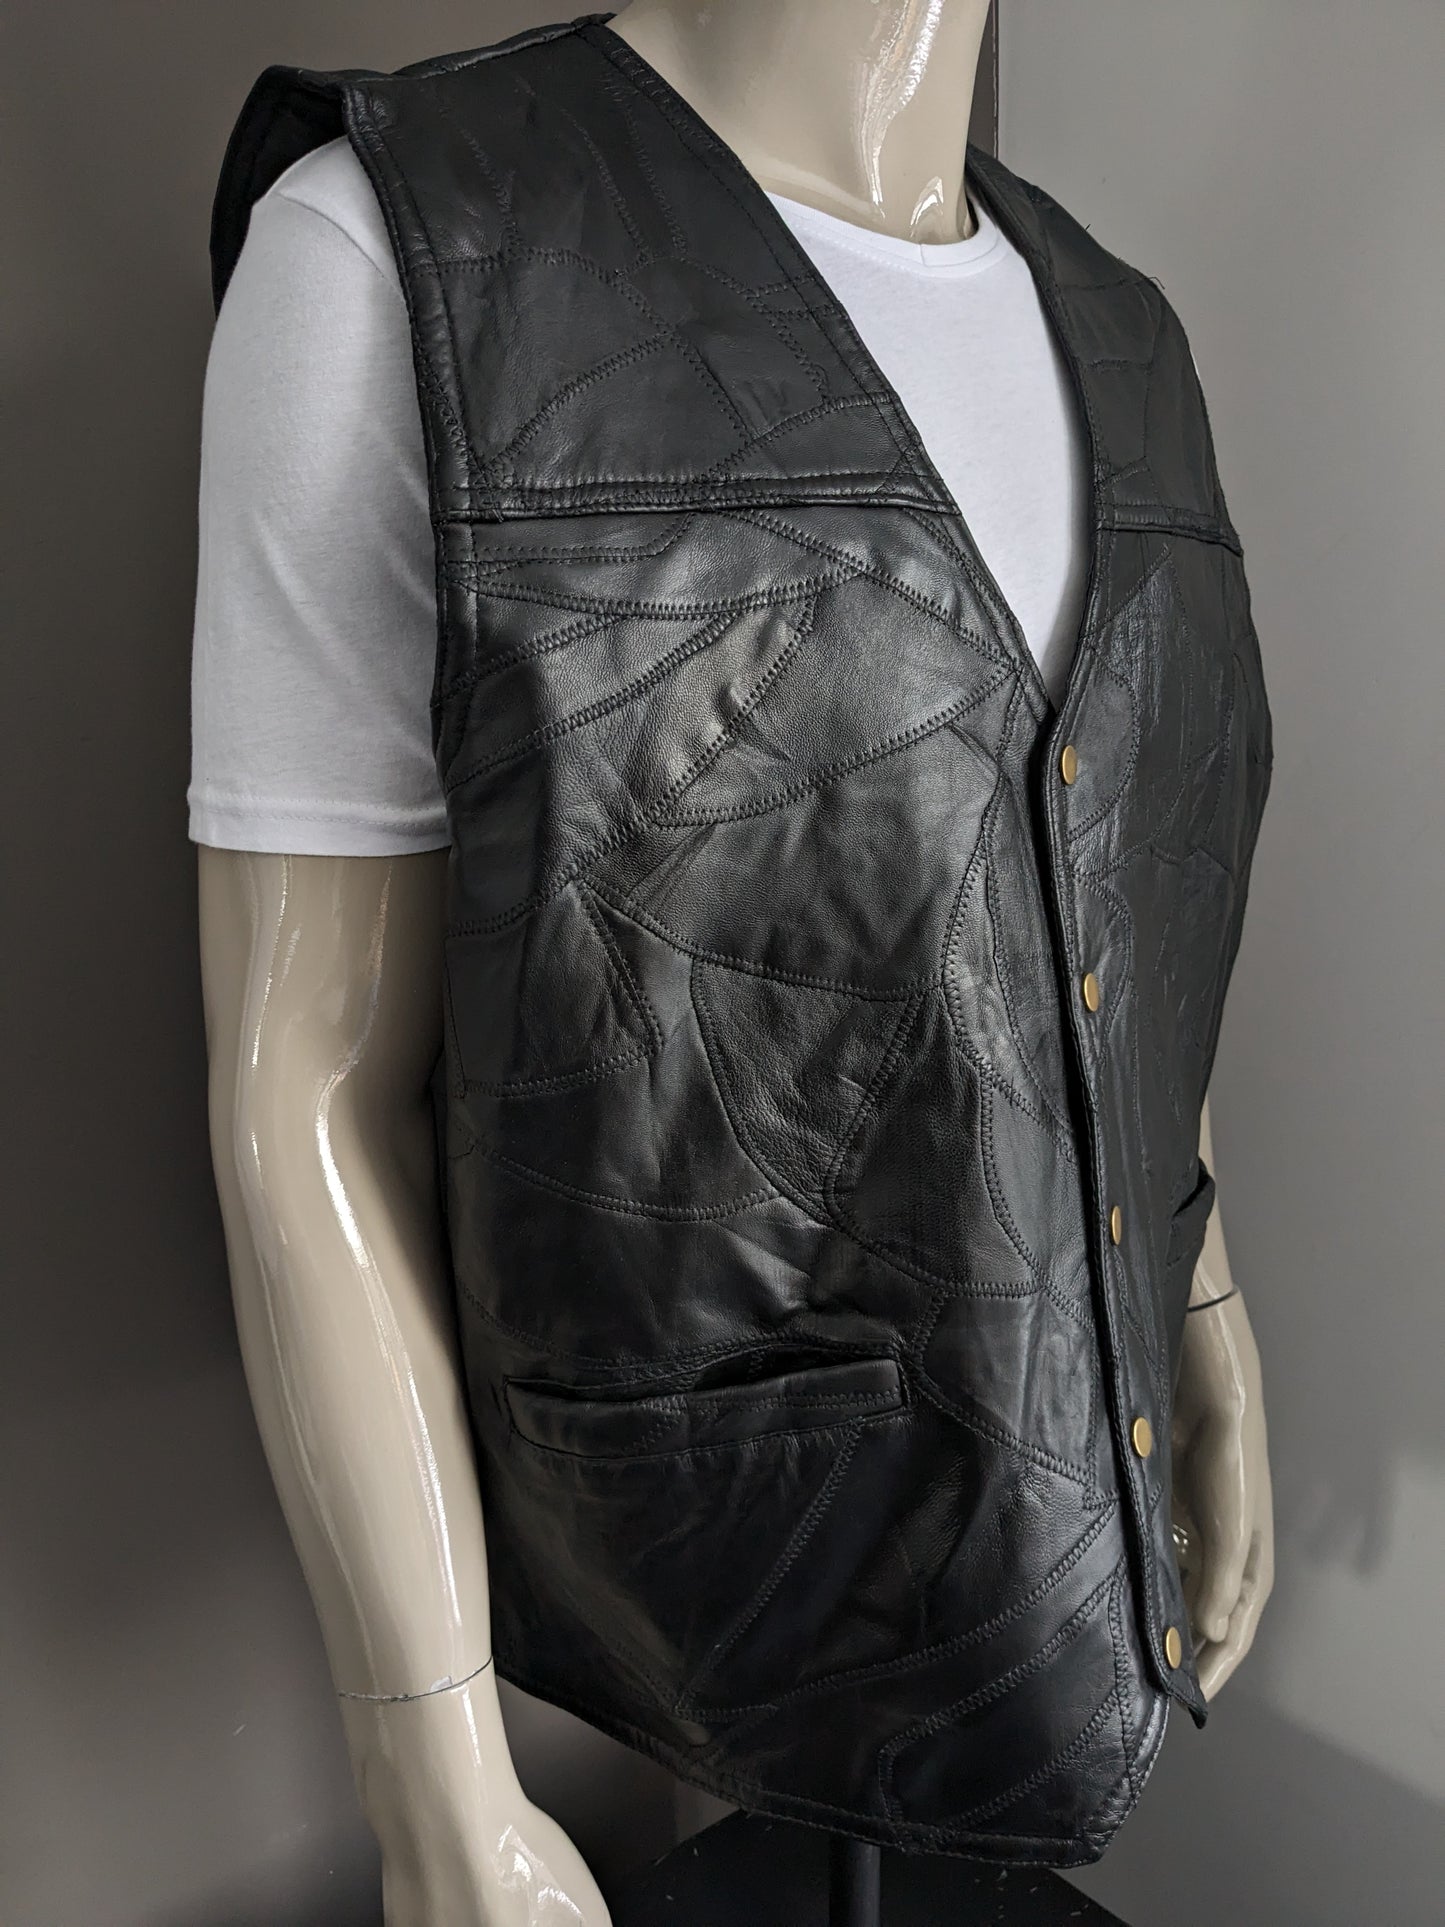 Leather double -sided waistcoat with press studs and patches. With inner pocket. Size 3XL / 4XL